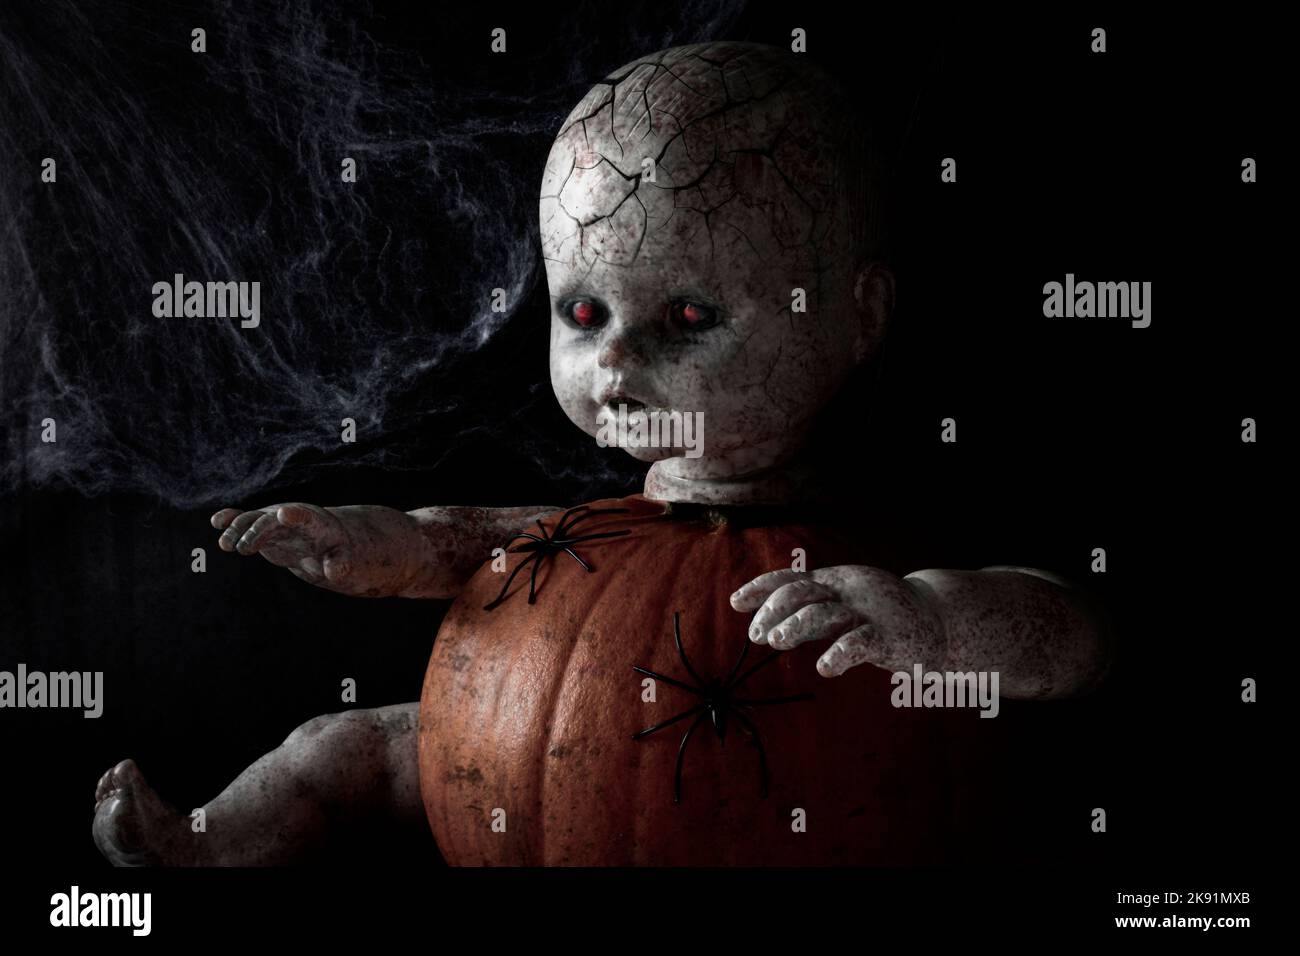 Zombie doll portrait. Creepy of doll face with glowing red eyes and zombie skin in the black background. Halloween concept. Stock Photo